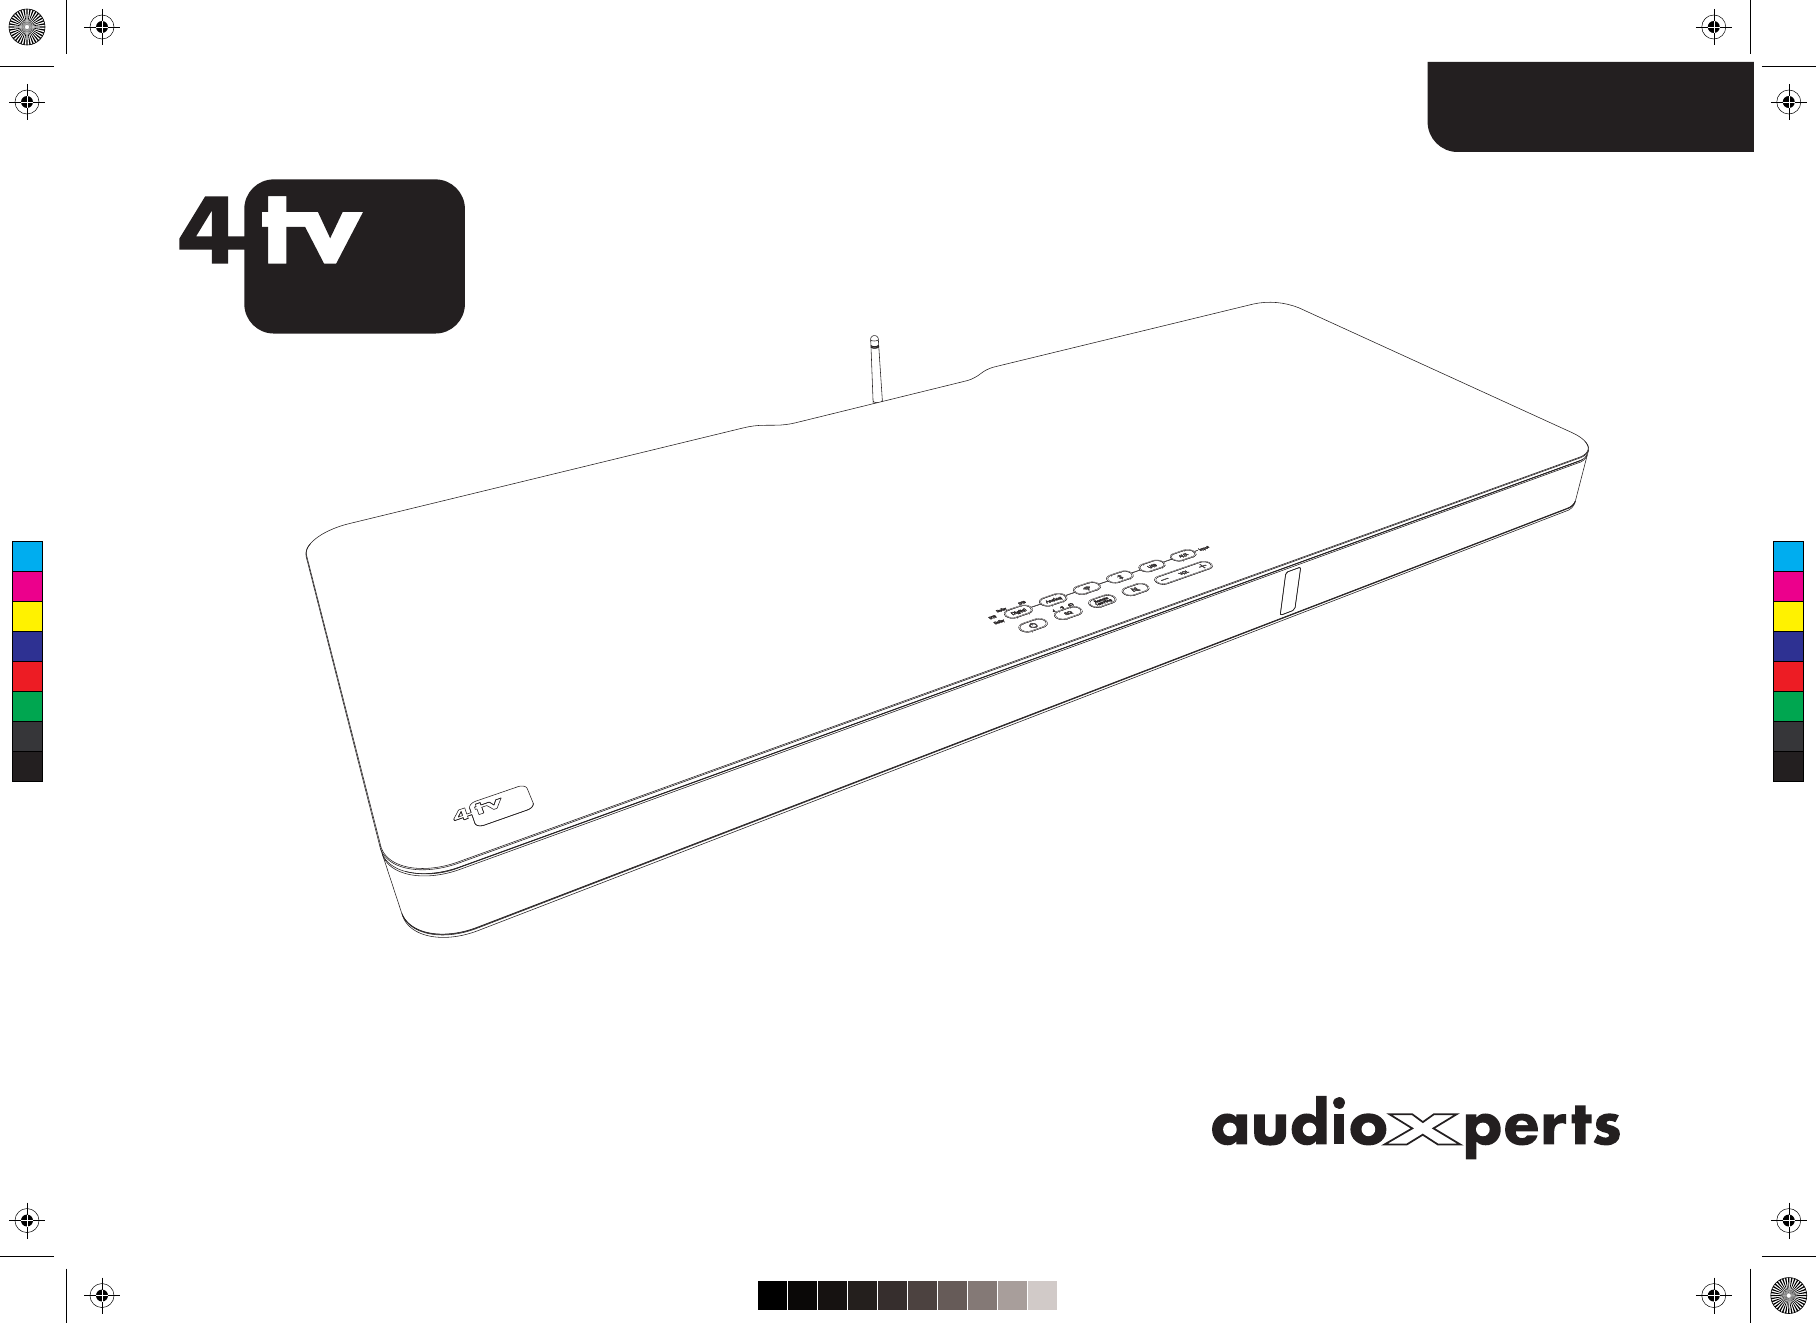 MEILOON SSC4TV21 Audio Entertainment Console User Manual 3